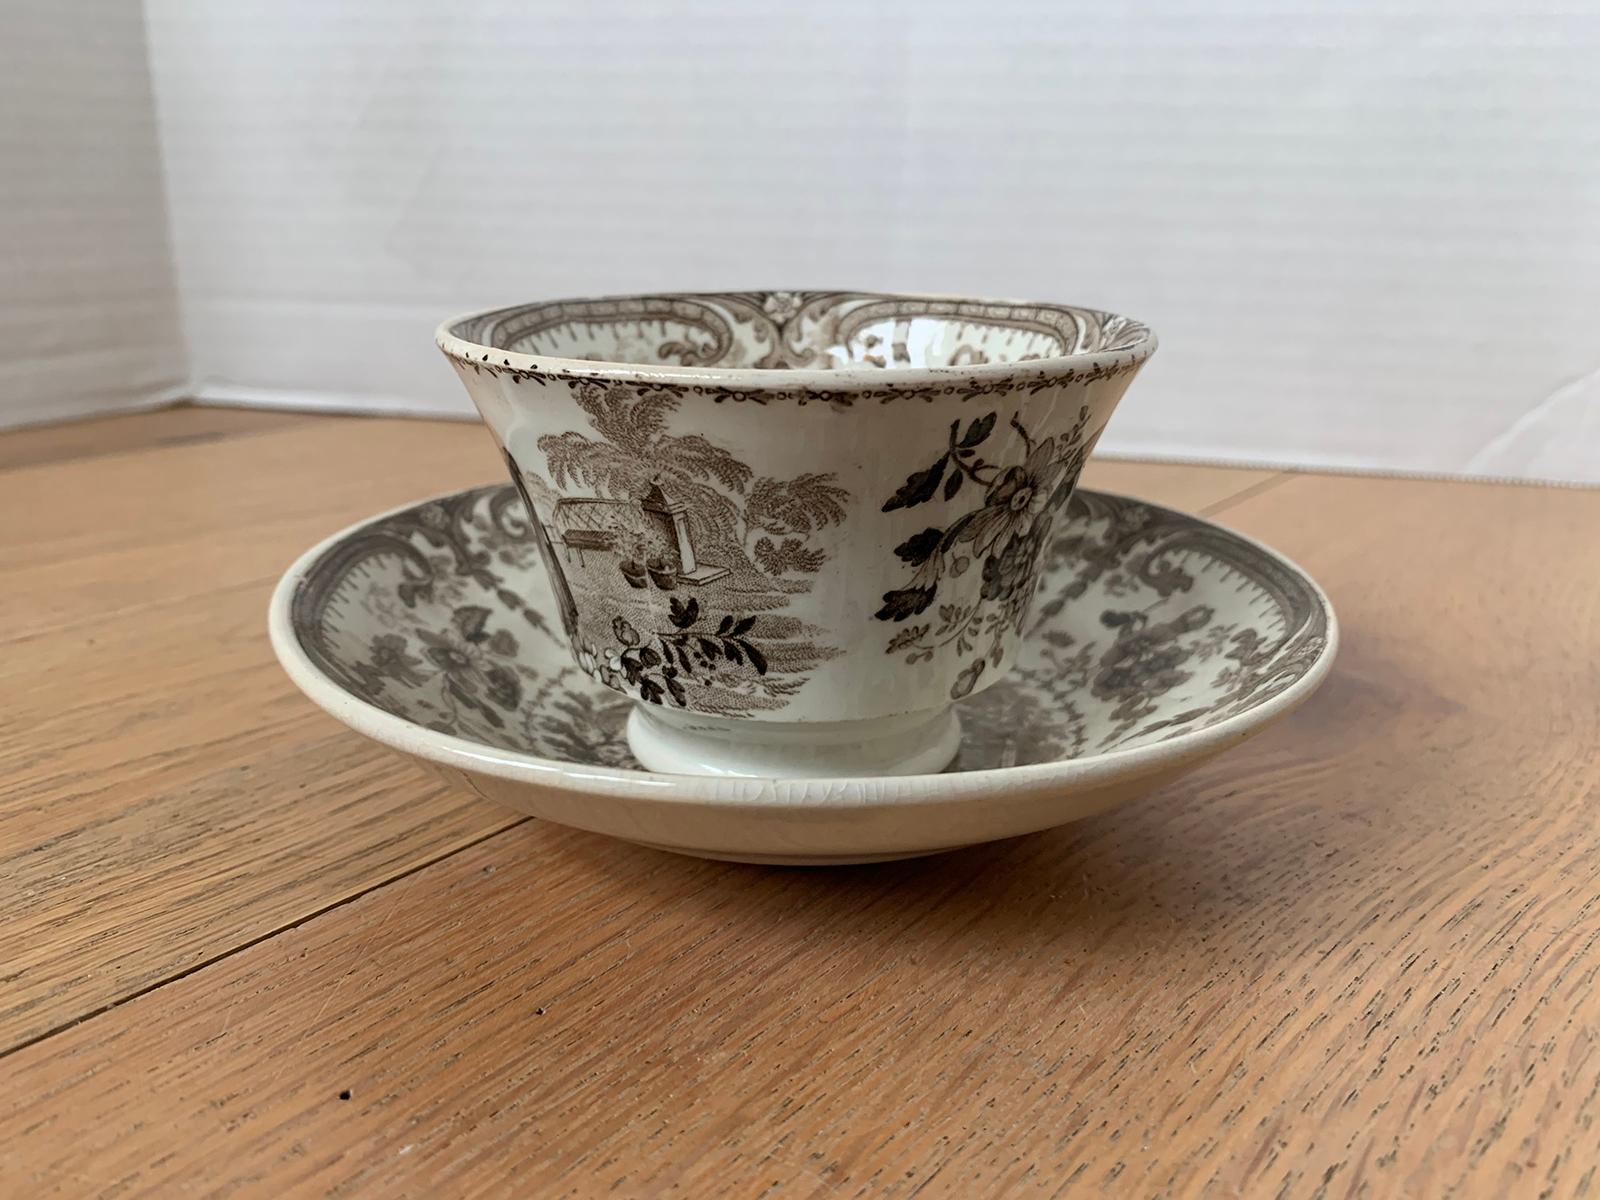 19th century English brown transferware porcelain cup and saucer with opaque China factory mark.